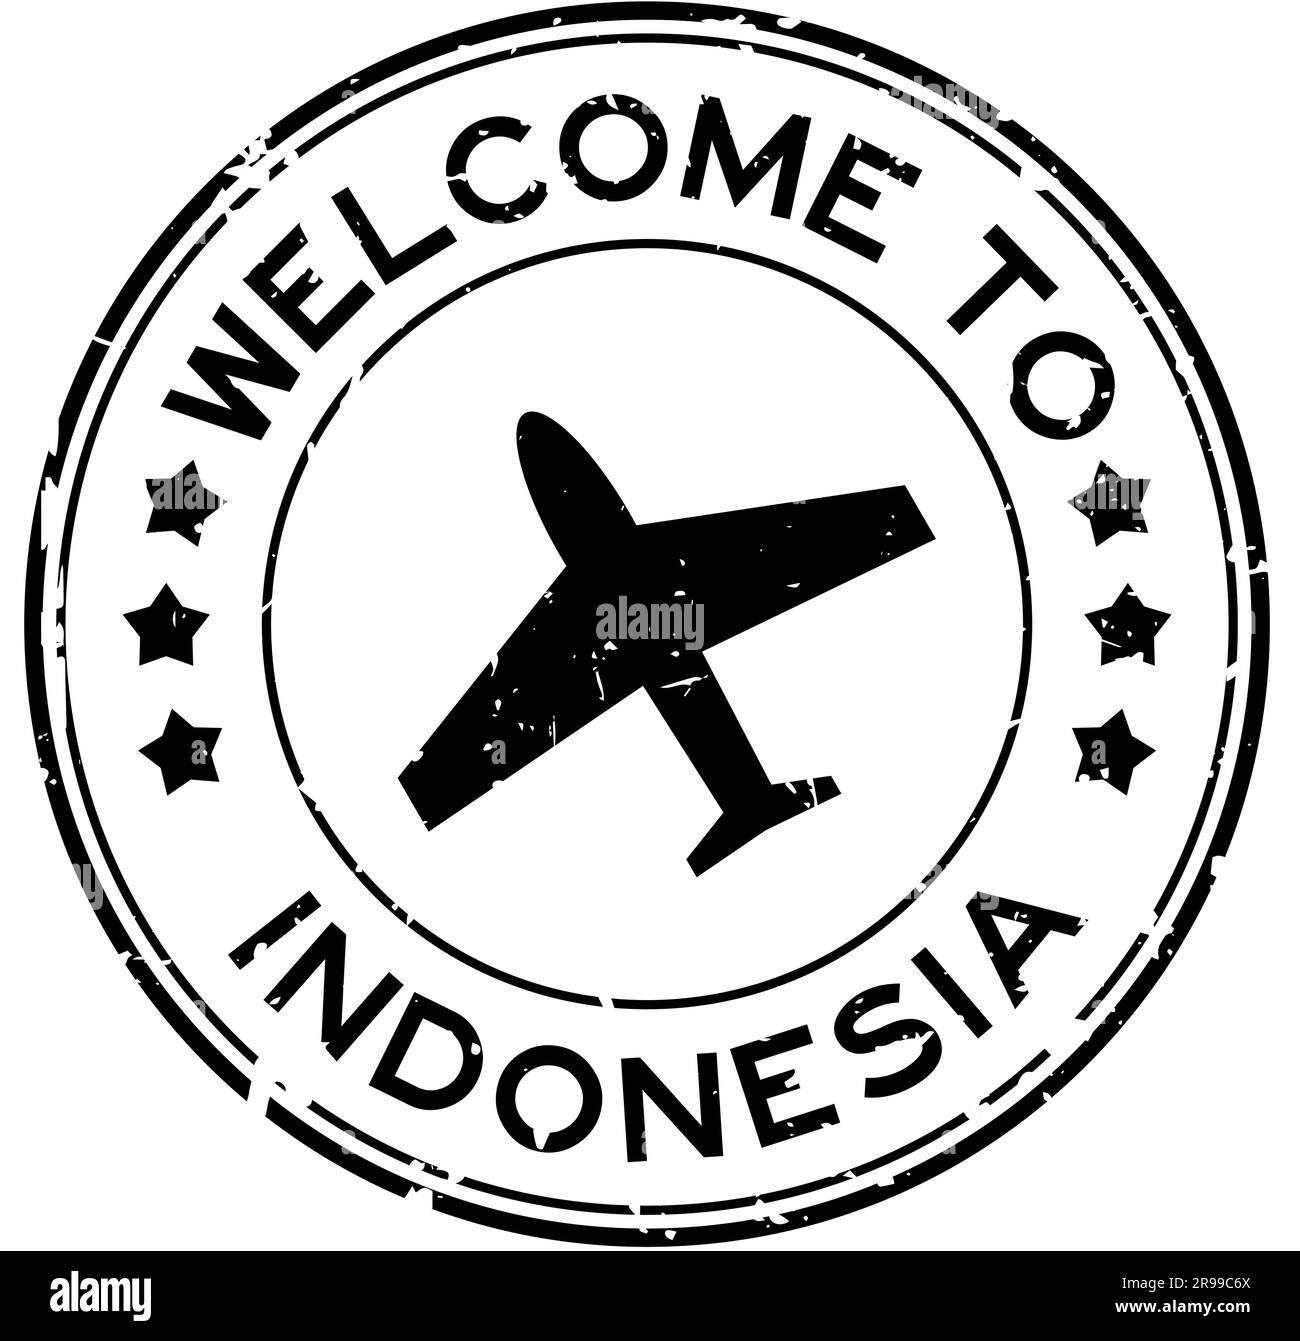 Grunge black welcome to indonesia with airplane icon round rubber seal stamp on white background Stock Vector